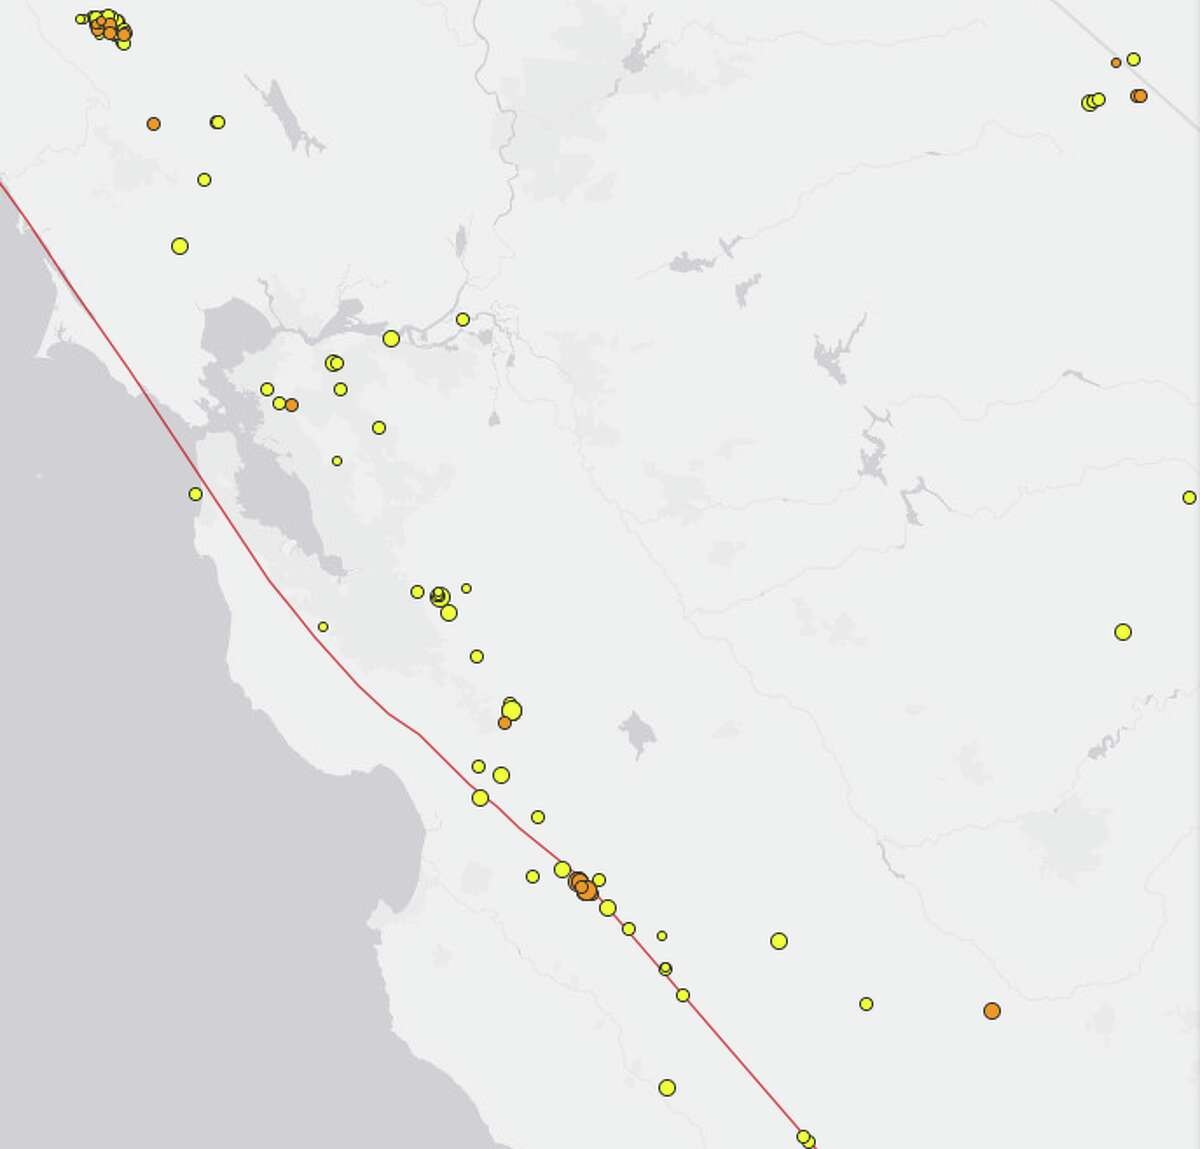 Seismic activity in the San Francisco Bay Area from Dec. 21 to Dec. 28. 2017.